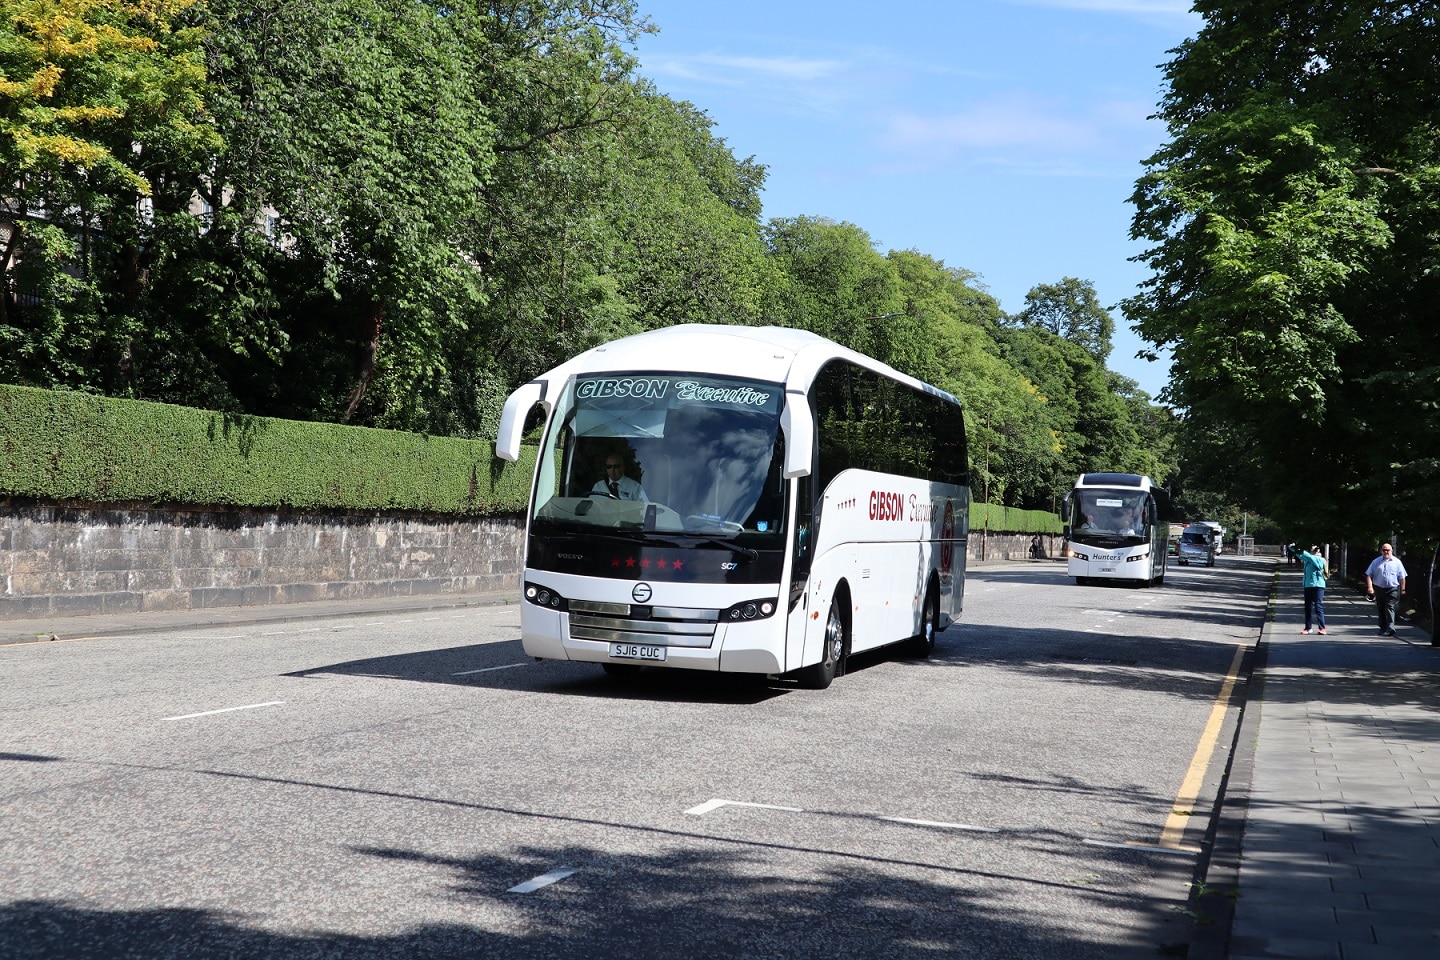 Scottish coach operators' support fund first round awards announced